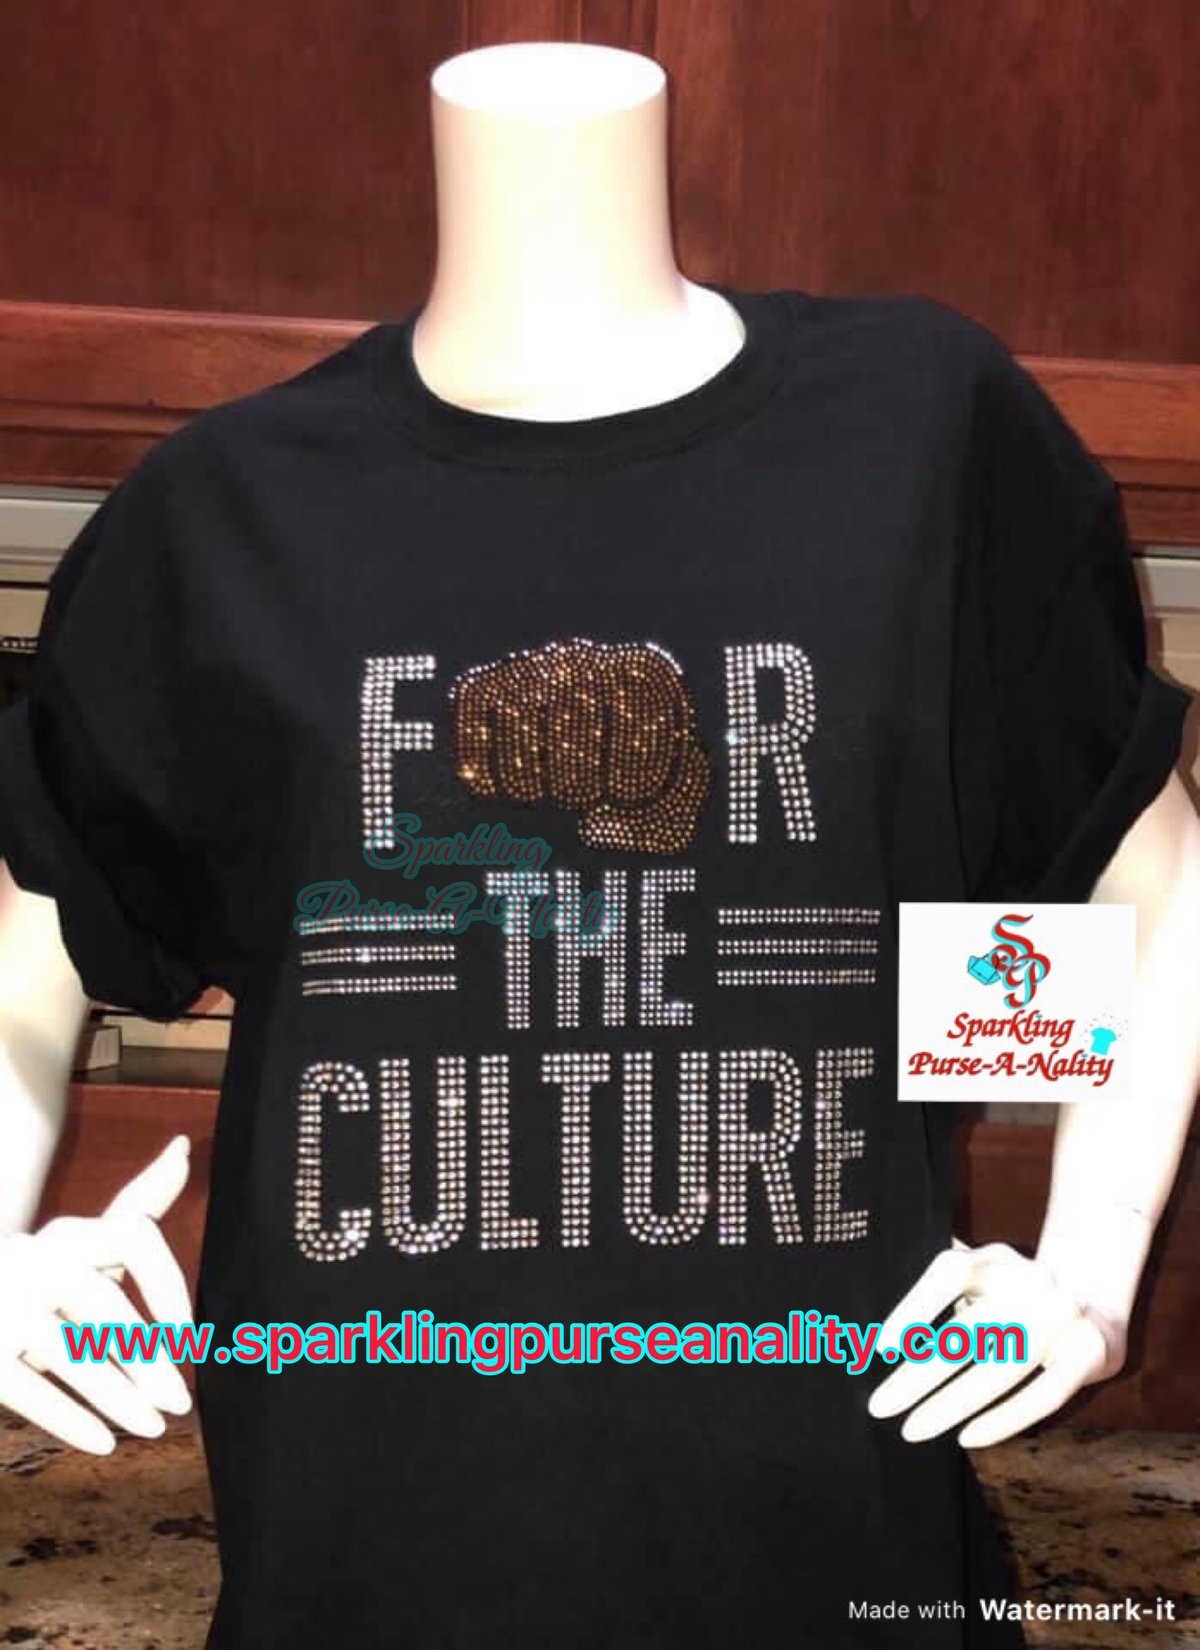 Image of "Sparkling" Culture Shirts